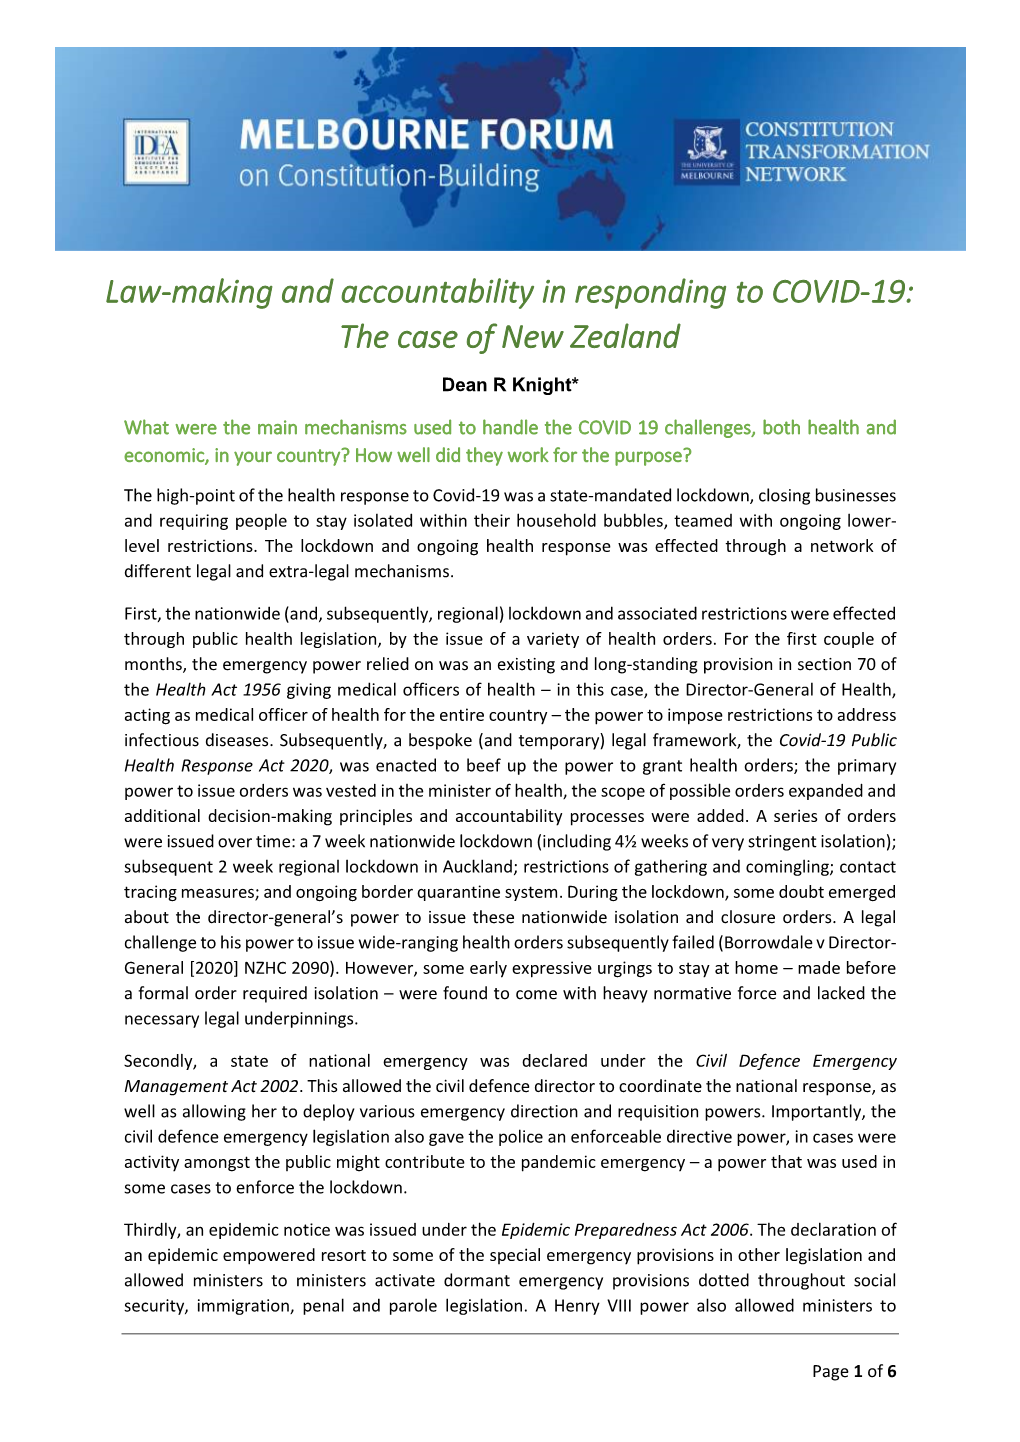 Law-Making and Accountability in Responding to COVID-19: the Case of New Zealand